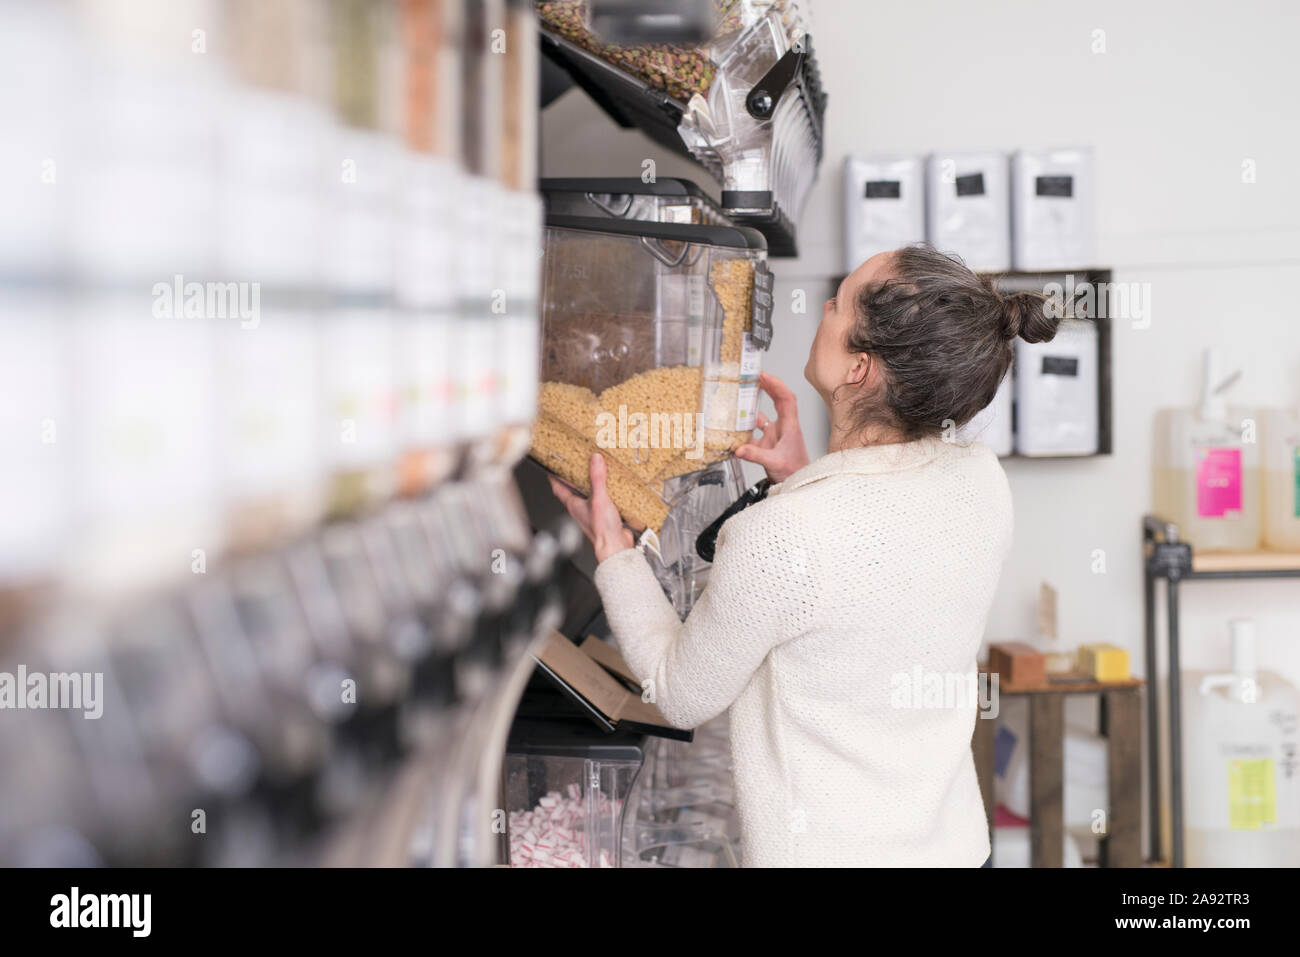 Woman working in shop Stock Photo